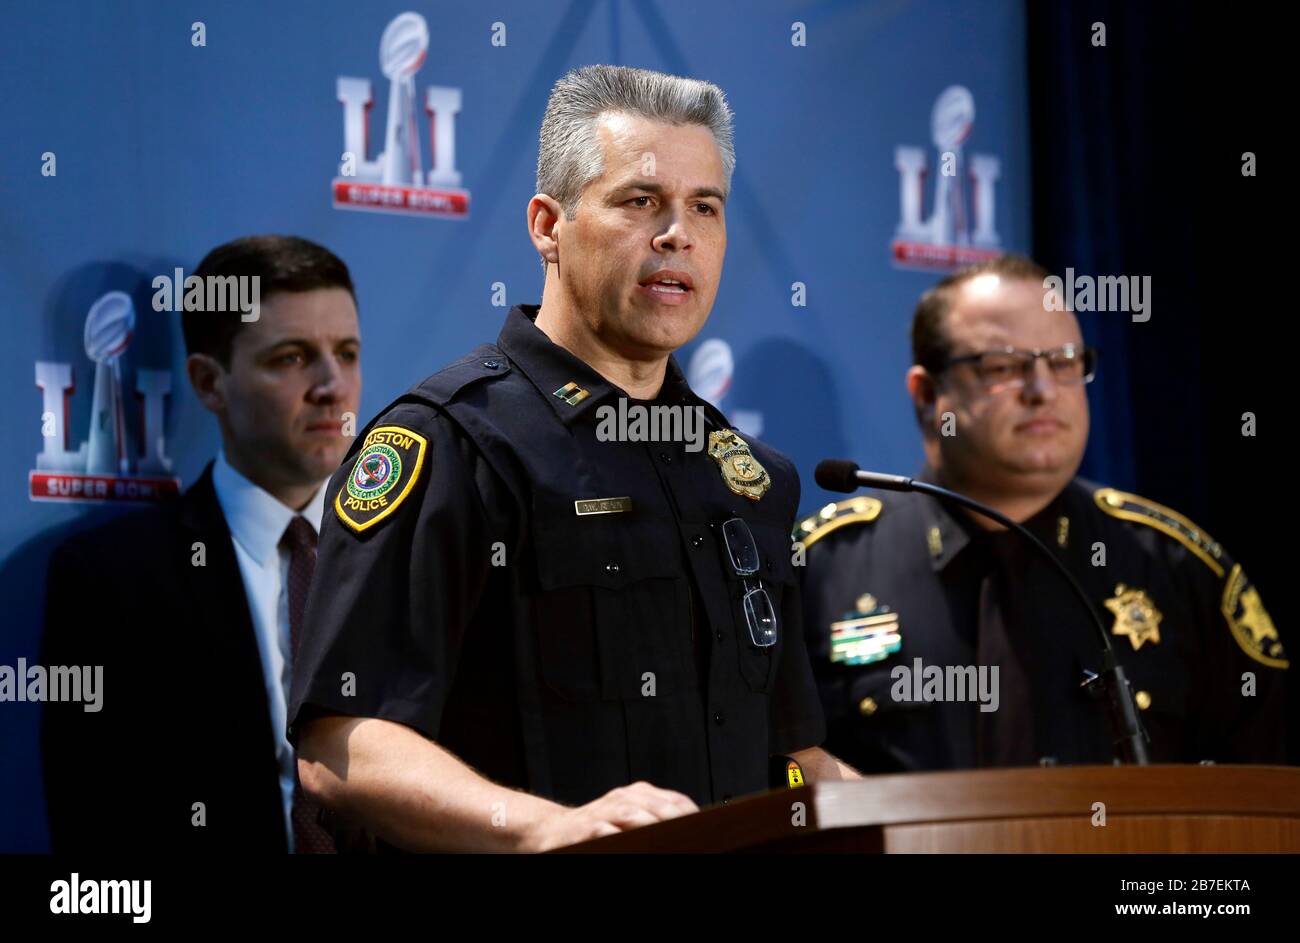 Houston Police Department Captain Dwayne Ready during a joint press conference on Operation Team Player at the George R. Brown Convention Center February 2, 2017 in Houston, Texas. Stock Photo